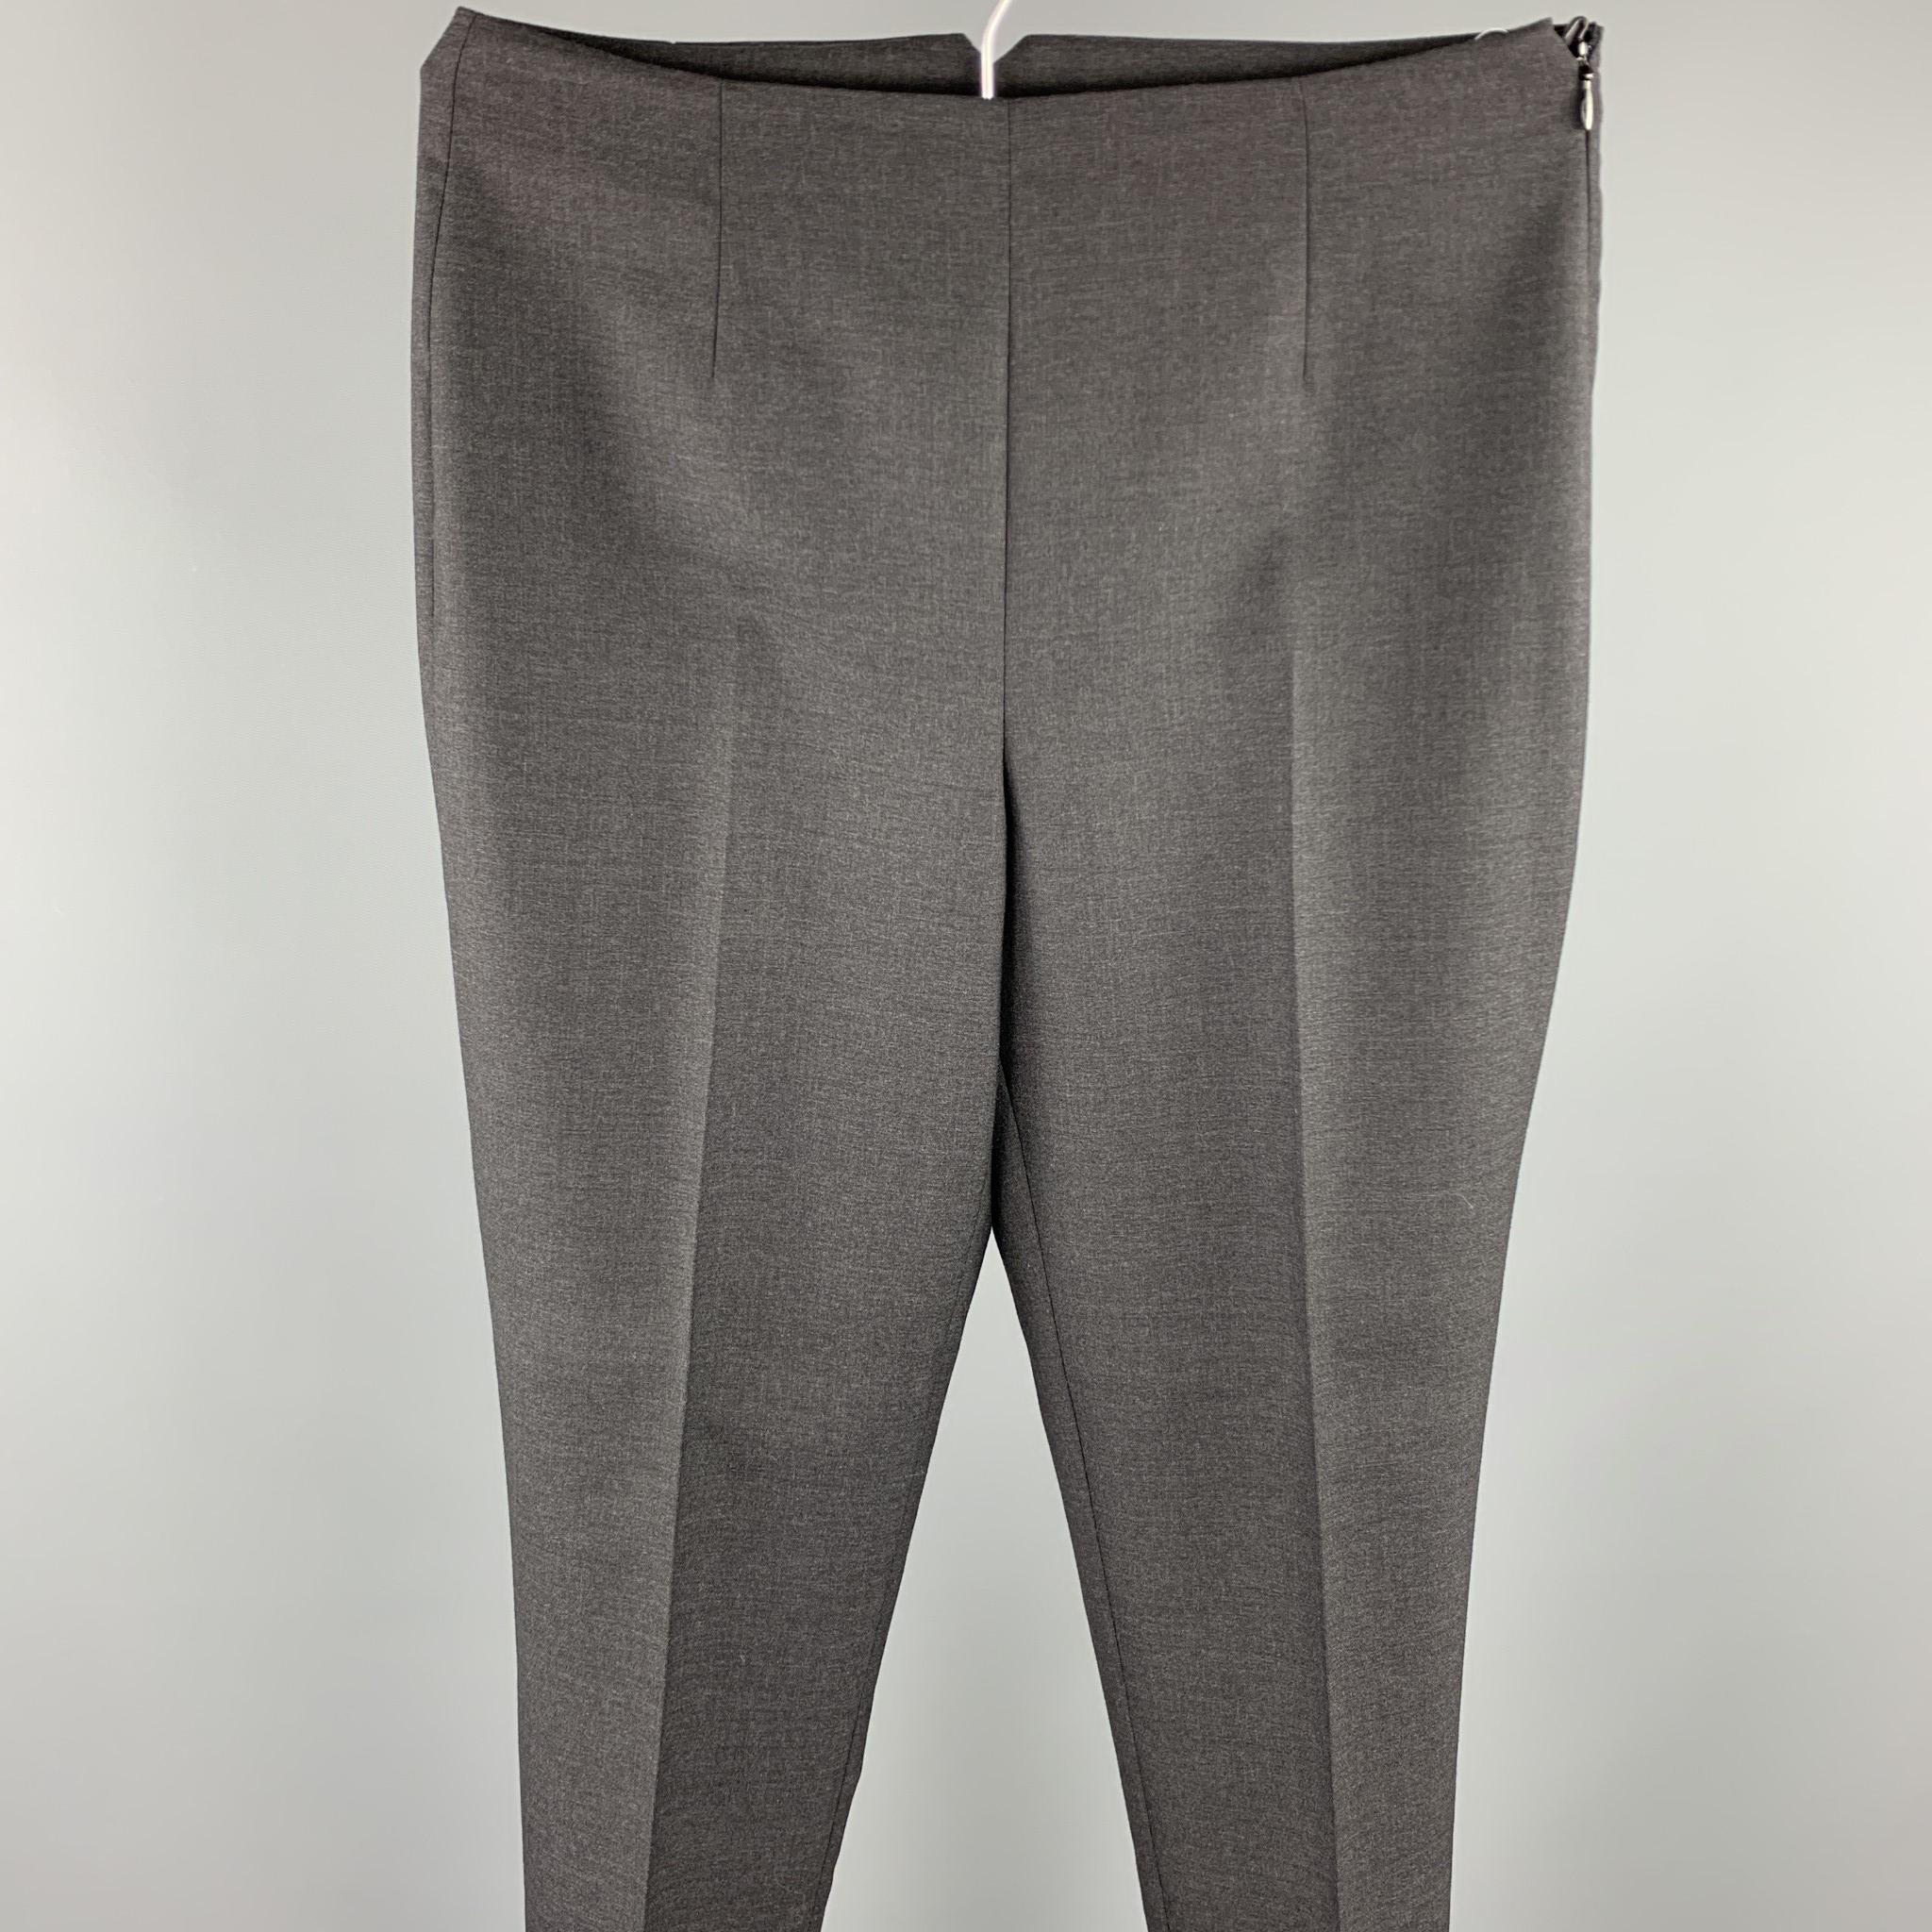 RALPH LAUREN COLLECTION dress pants comes in a charcoal fabric featuring a front pleat and a side zipper closure.

Excellent Pre-Owned Condition.
Marked: 4

Measurements:

Waist: 28 in. 
Rise: 11 in. 
Inseam: 29 in. 